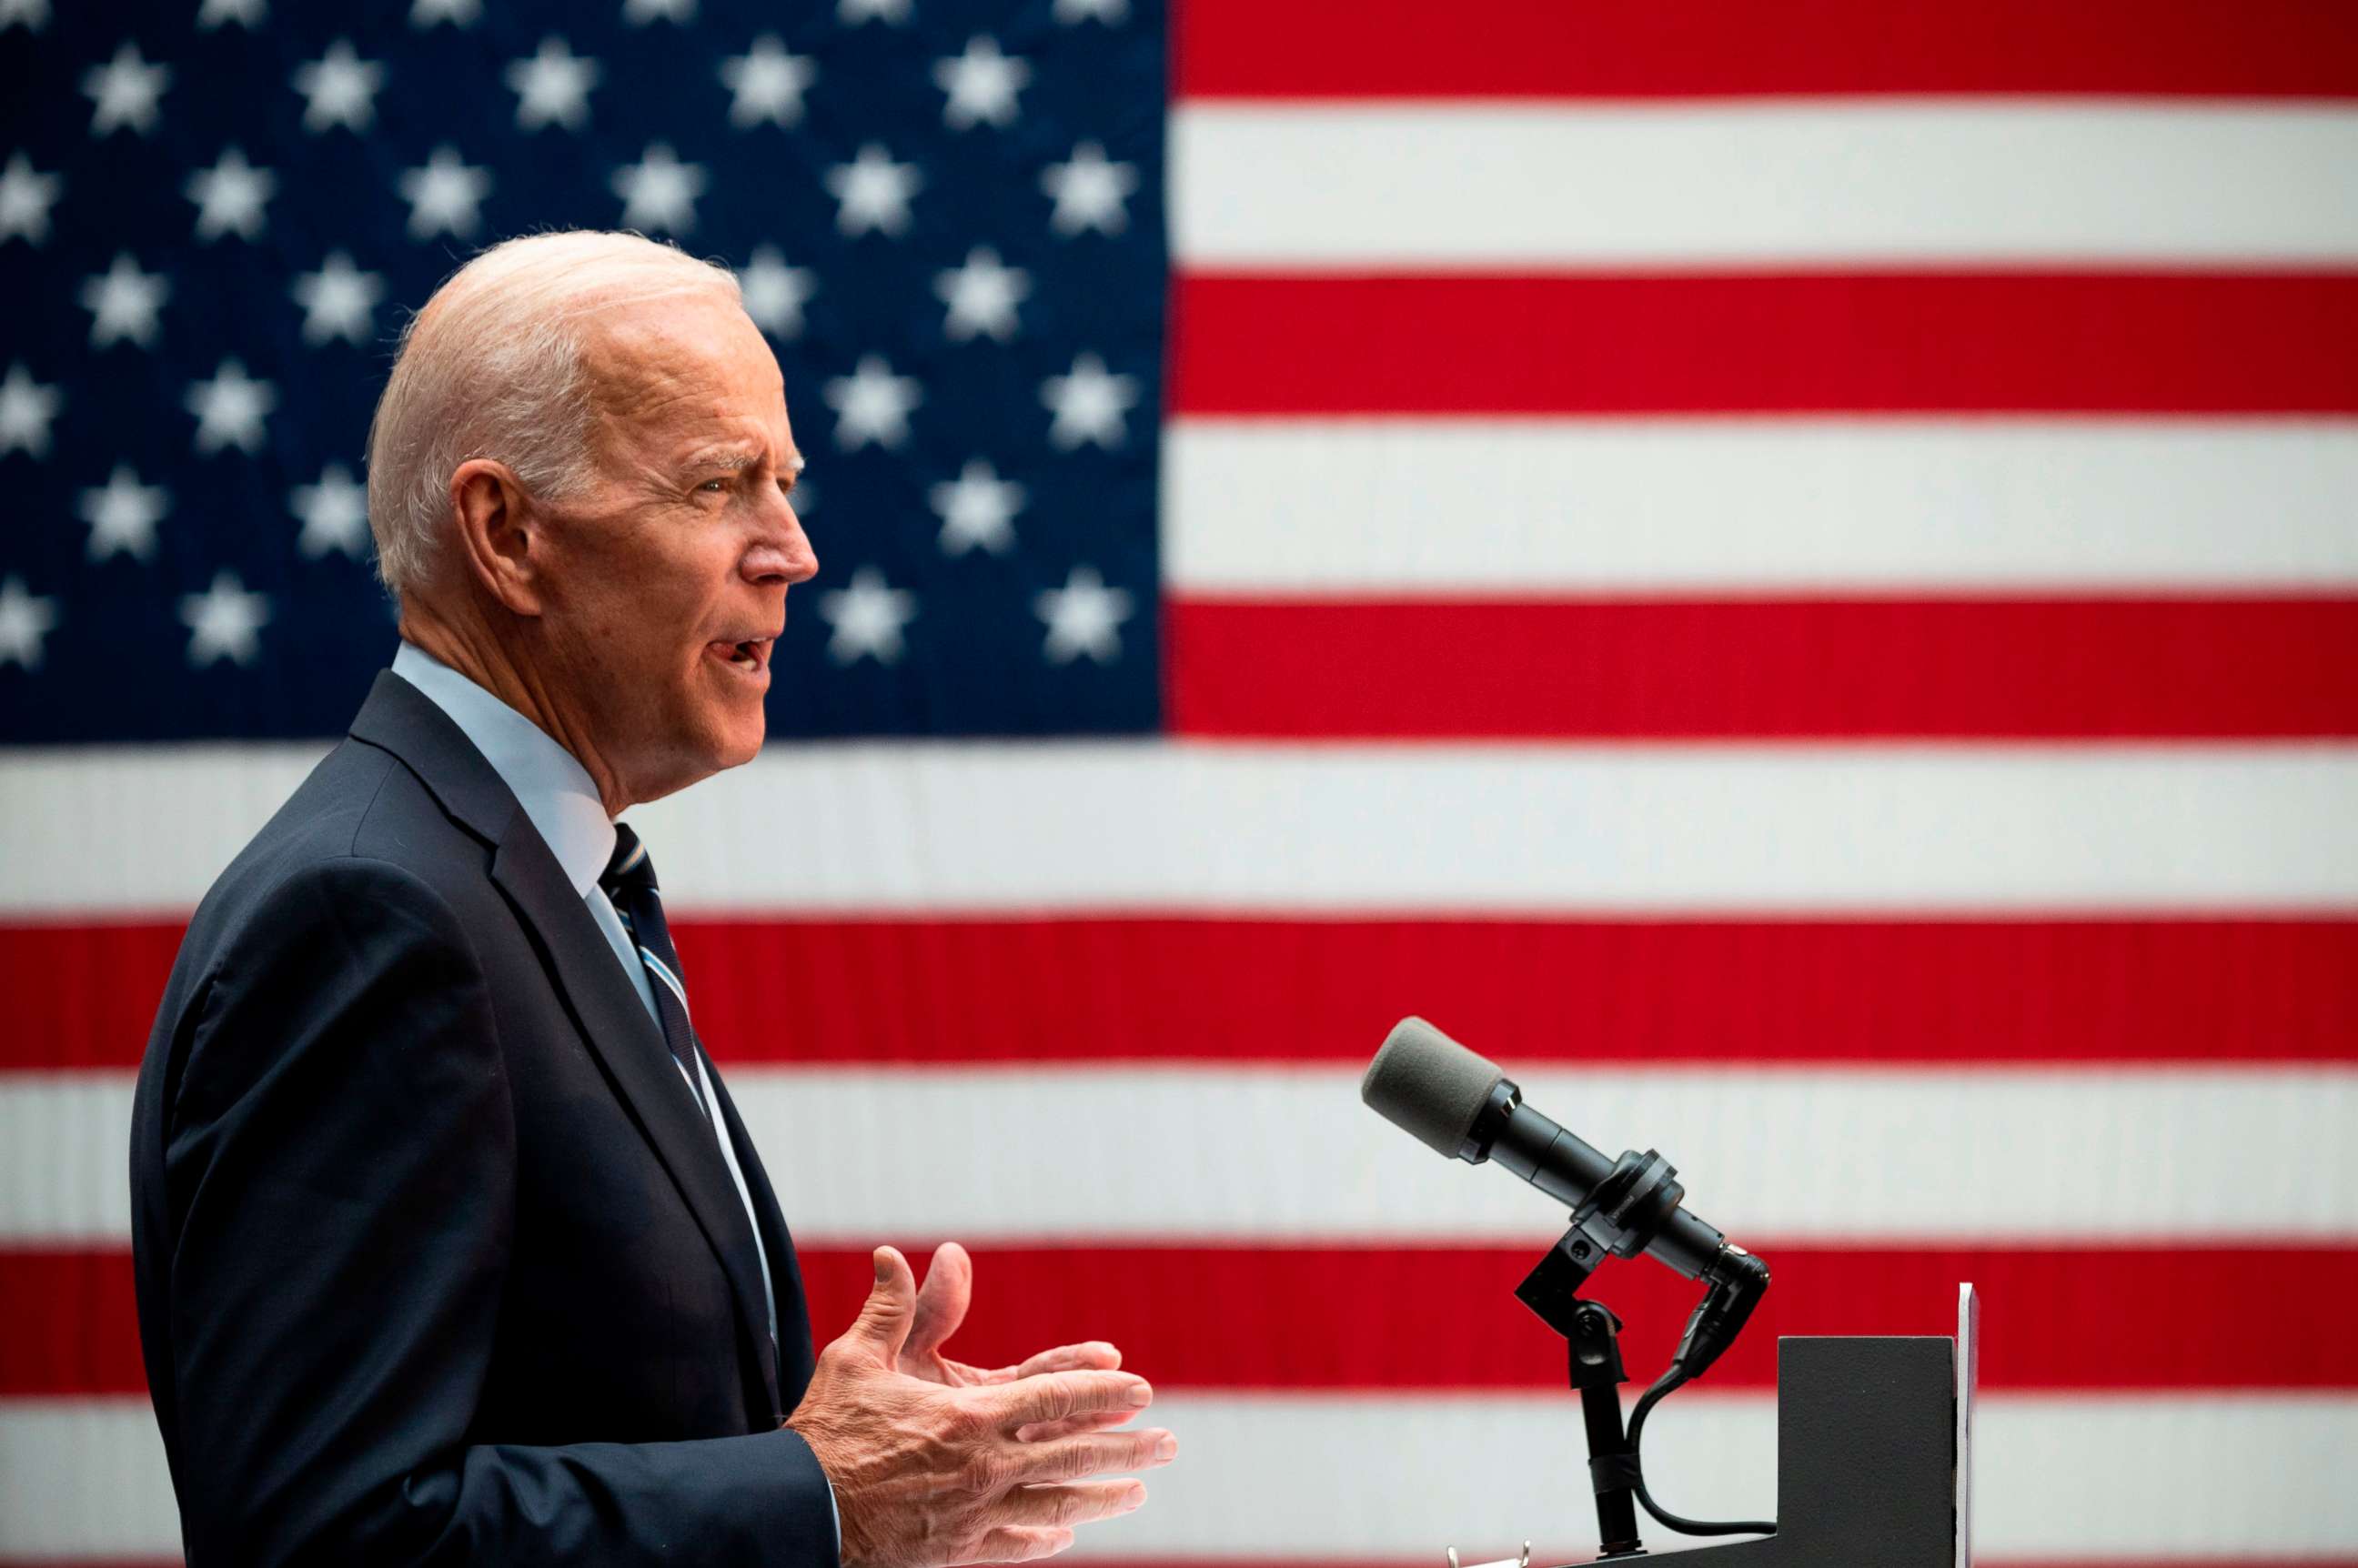 PHOTO: Former US Vice President Joe Biden gestures as he holds a speech about his foreign policy vision for America on July 11, 2019 at the Graduate Center at City University New York City.